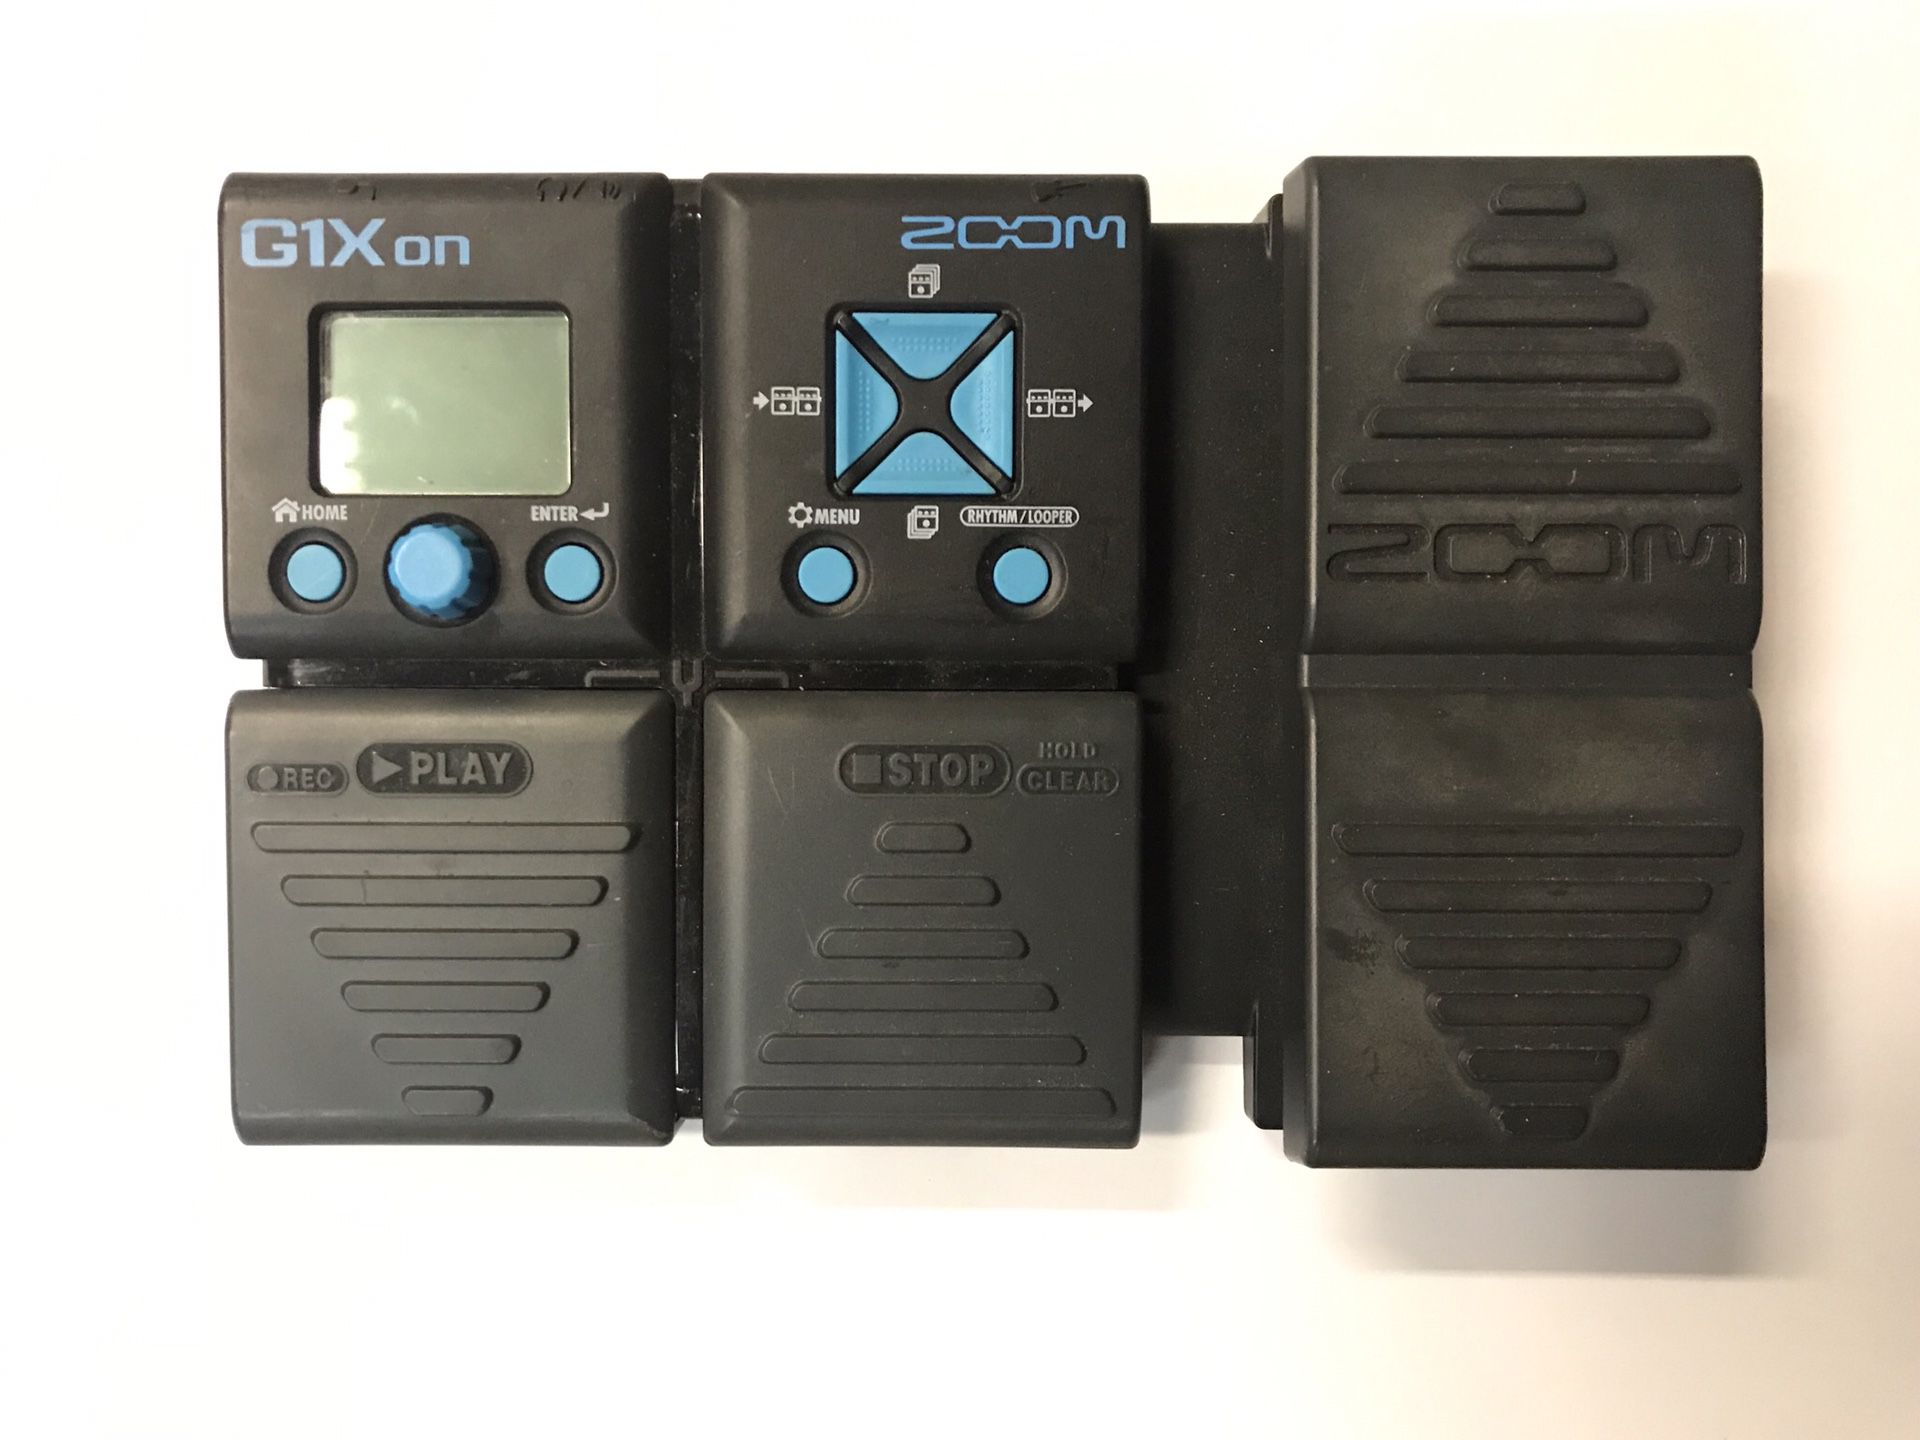 ZOOM G1Xon Guitar / Bass Multi-effects Amp Modeling Pedal w/ Expression Pedal